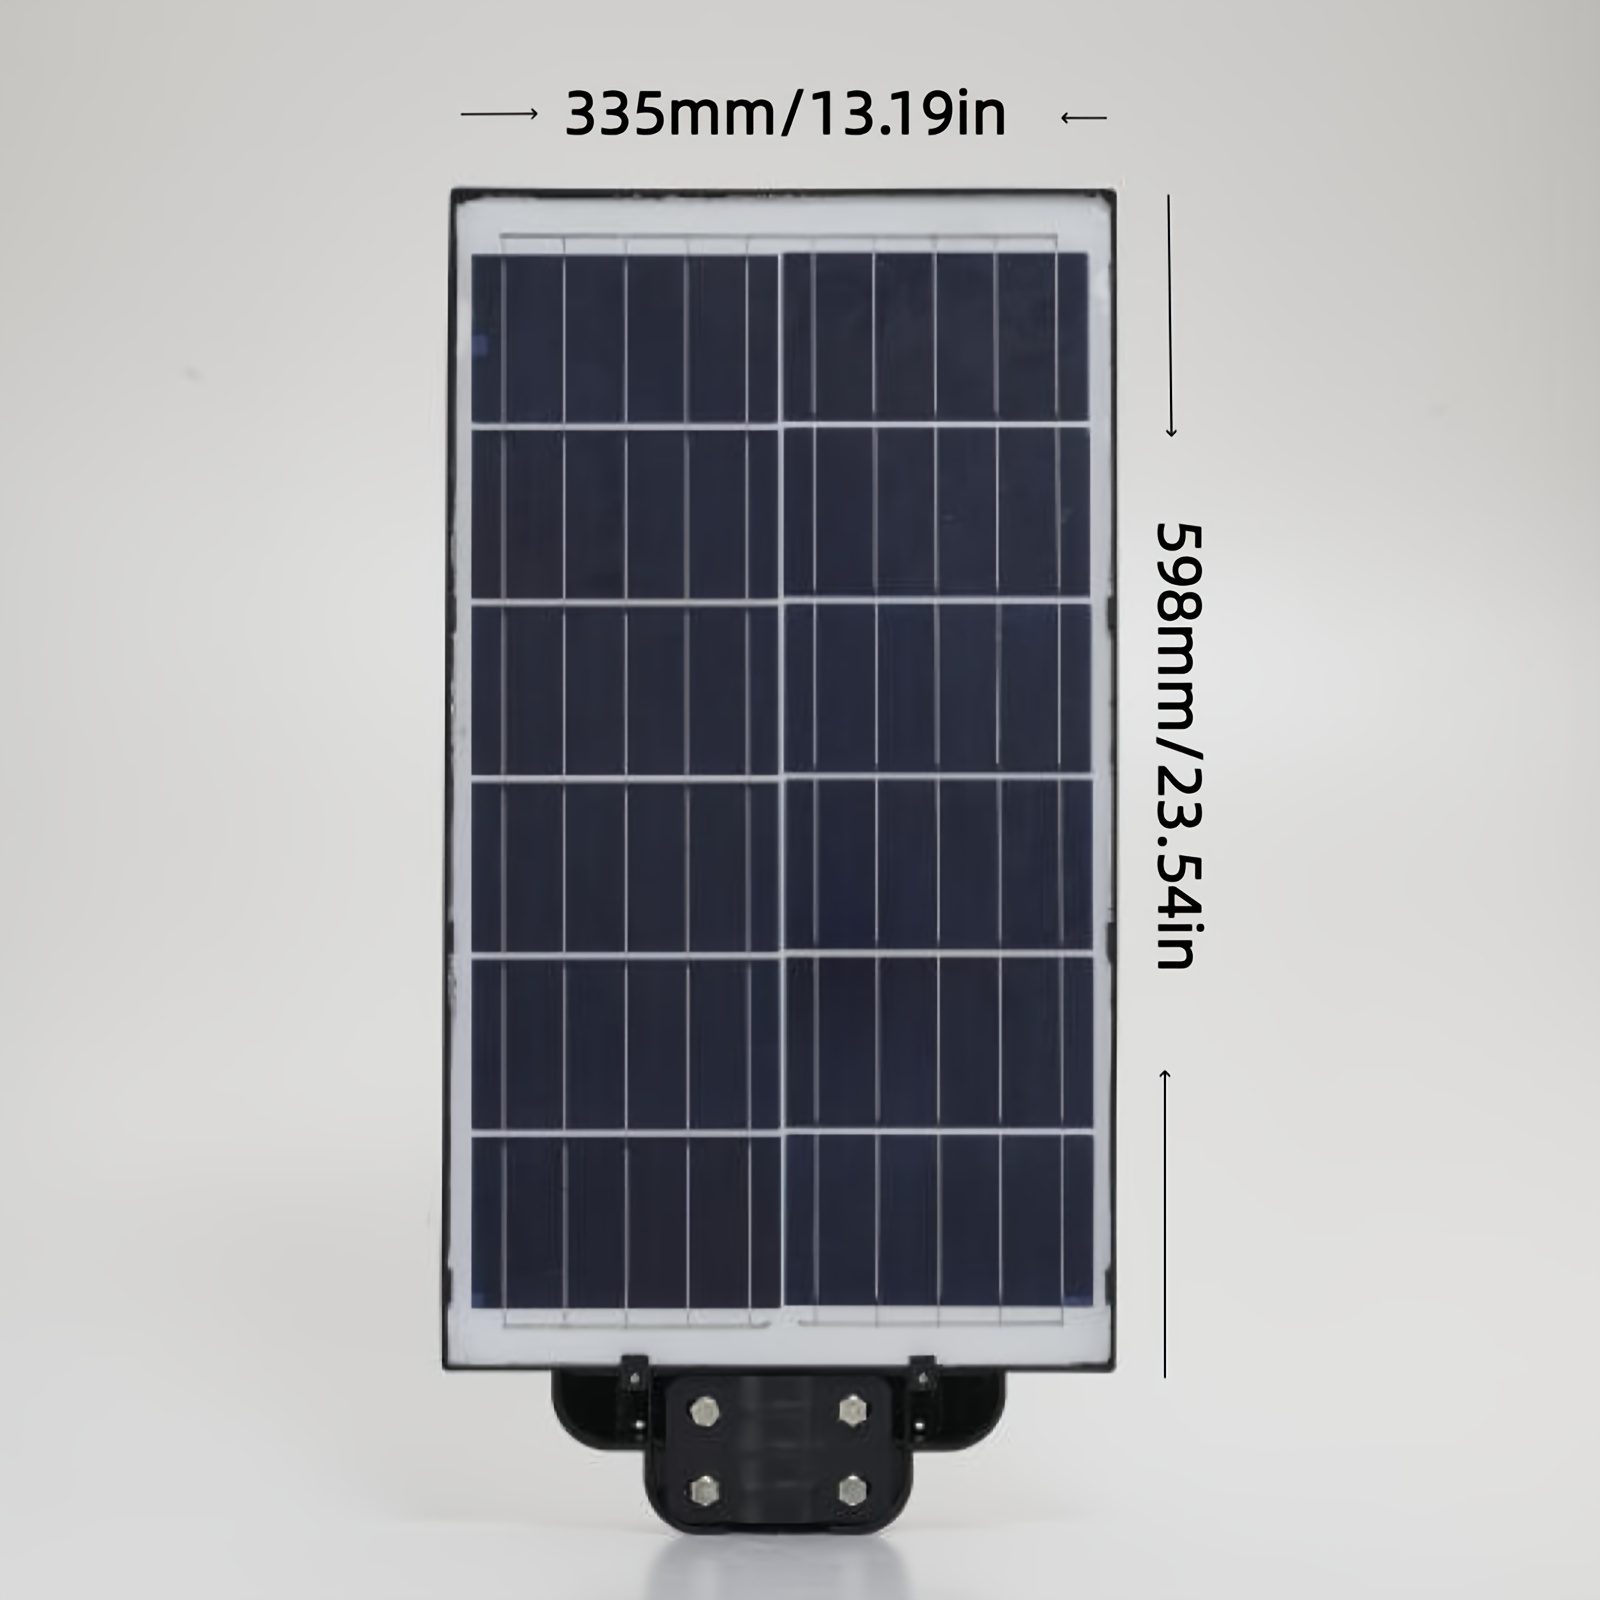 1pc integrated solar street light super high power cayenne model black and illuminated from all sides light control human body induction remote control charging display function suitable for home courtyards gardens outdoors and roadside details 8